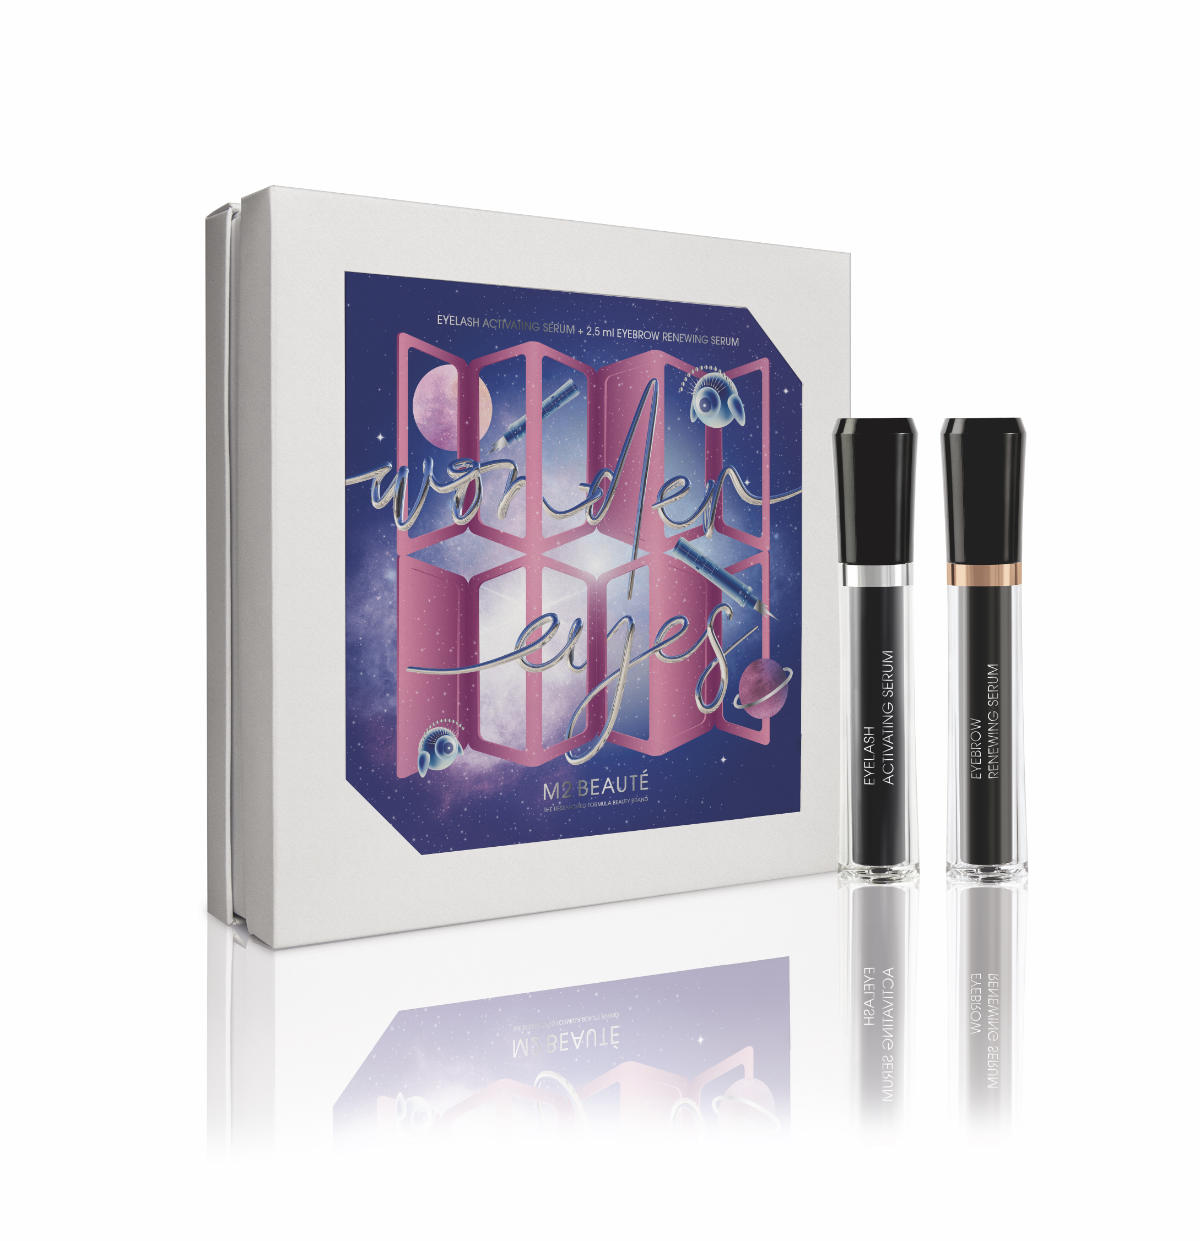 M2 BEAUTÉ Presents Wonder Eyes Bundle, A Special Christmas Edition For Two Coveted Beauty Classics